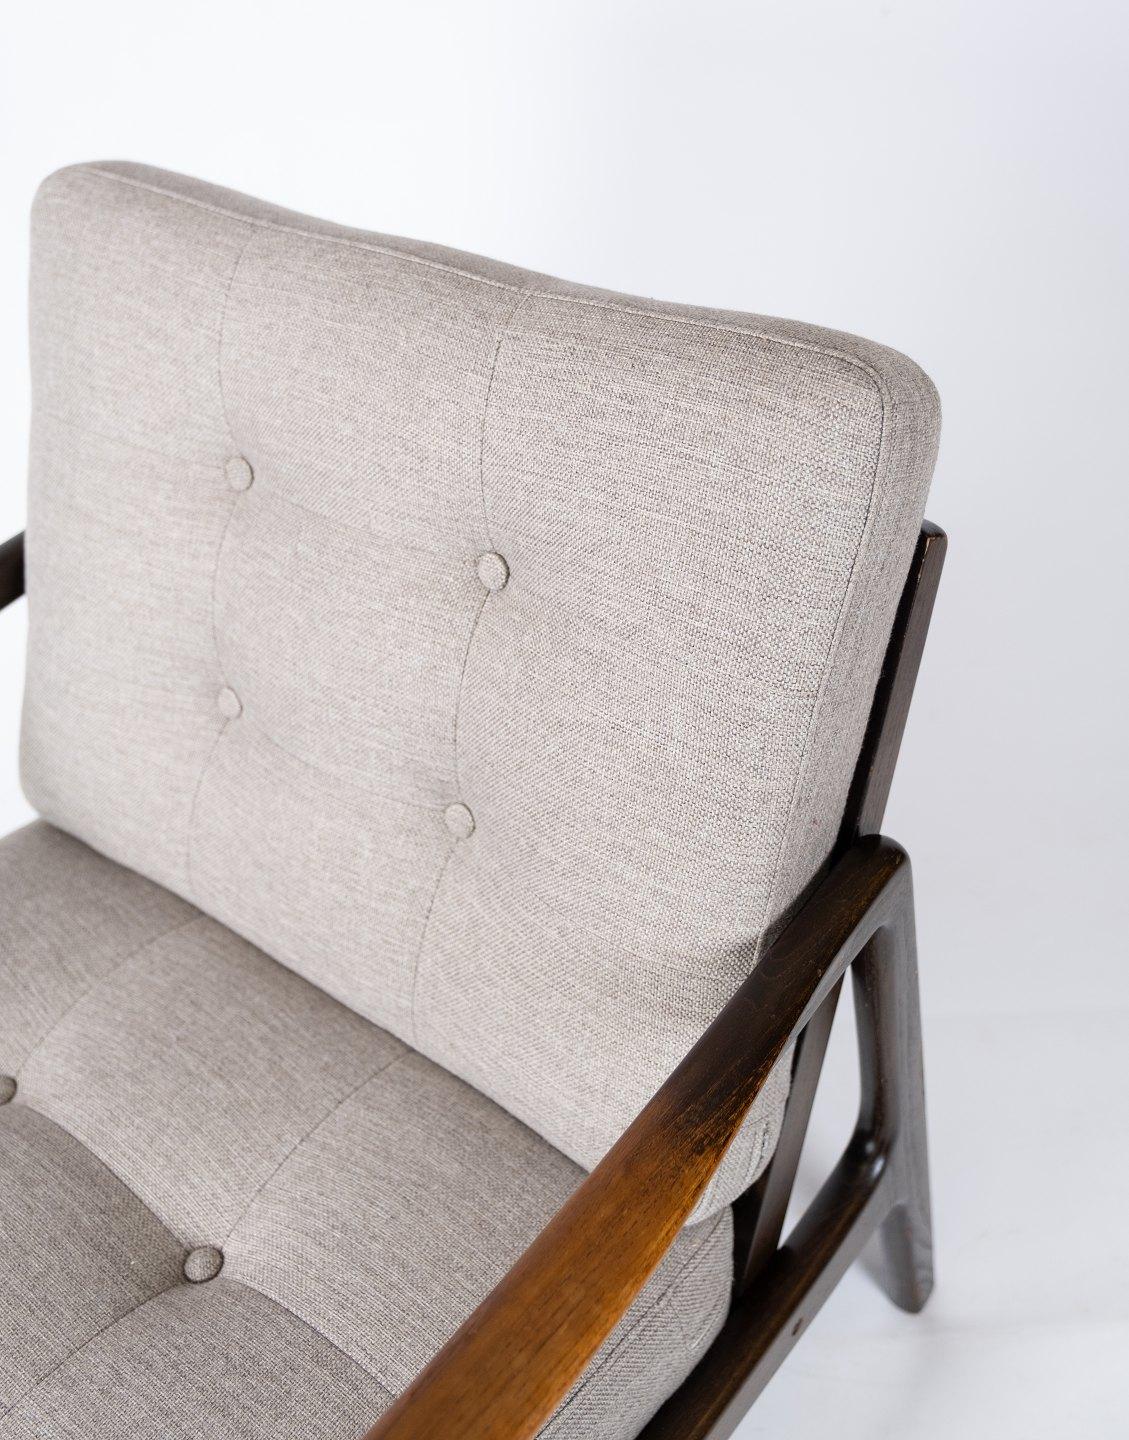 
This elegant easy chair, crafted from teak and expertly reupholstered in soft grey wool, is a stunning example of mid-century Scandinavian design. Designed by the acclaimed Danish designer Kai Kristiansen in the 1960s, this chair embodies the